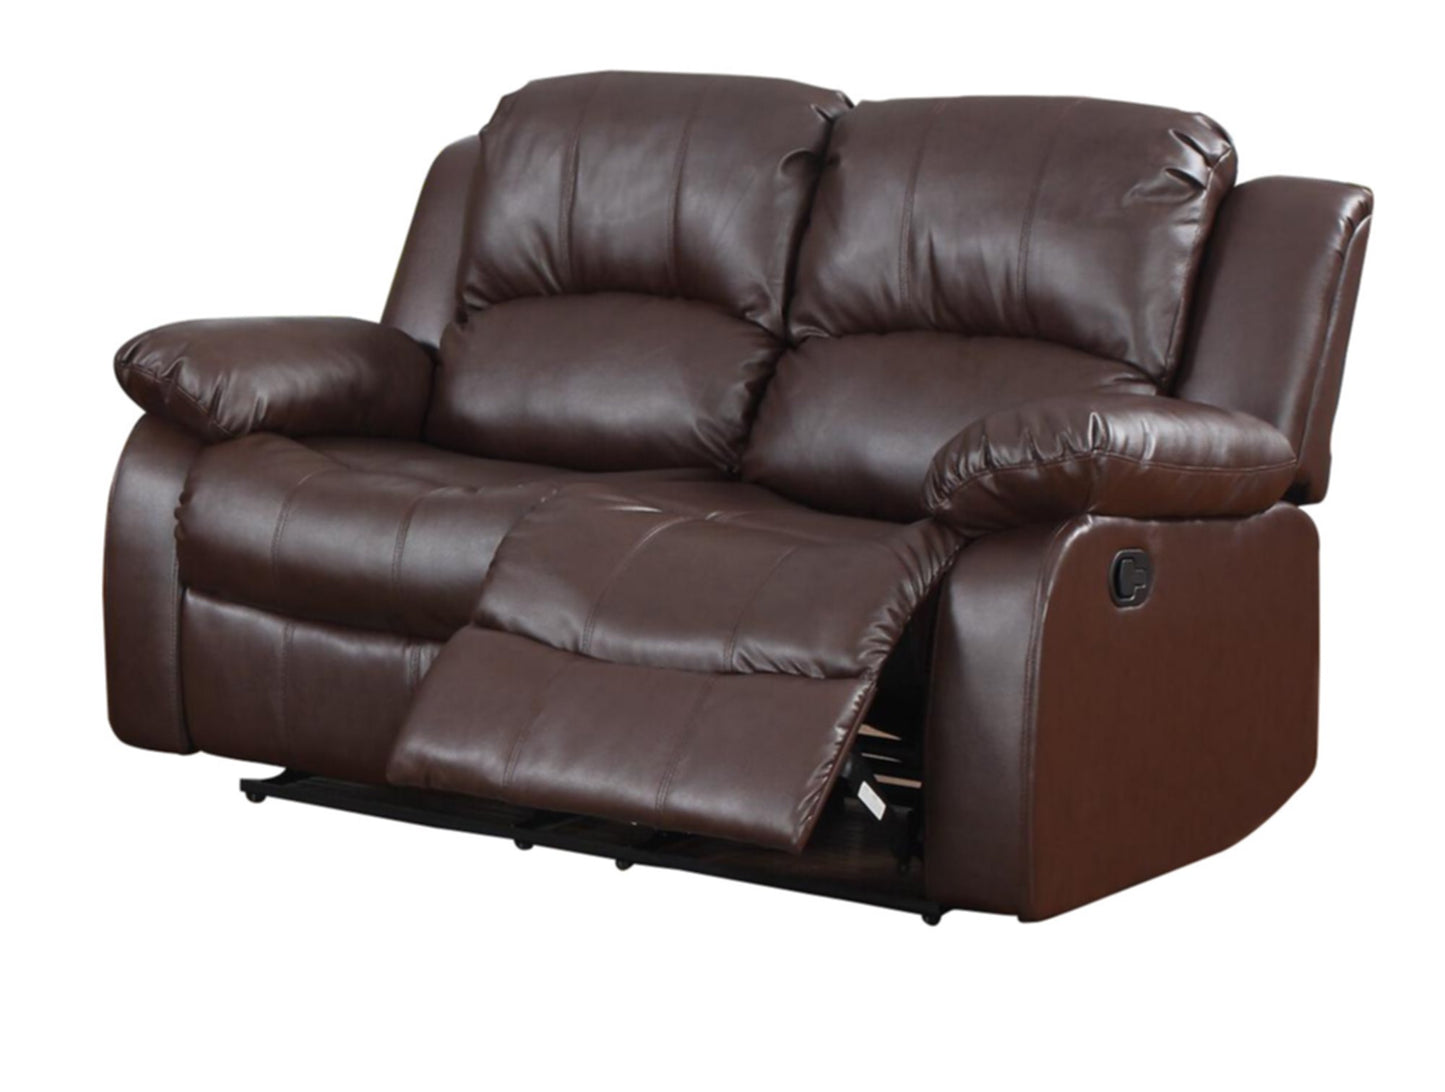 Homelegance Cranley 2PC Set Double Reclining Sofa & Love Seat in Leather - Brown